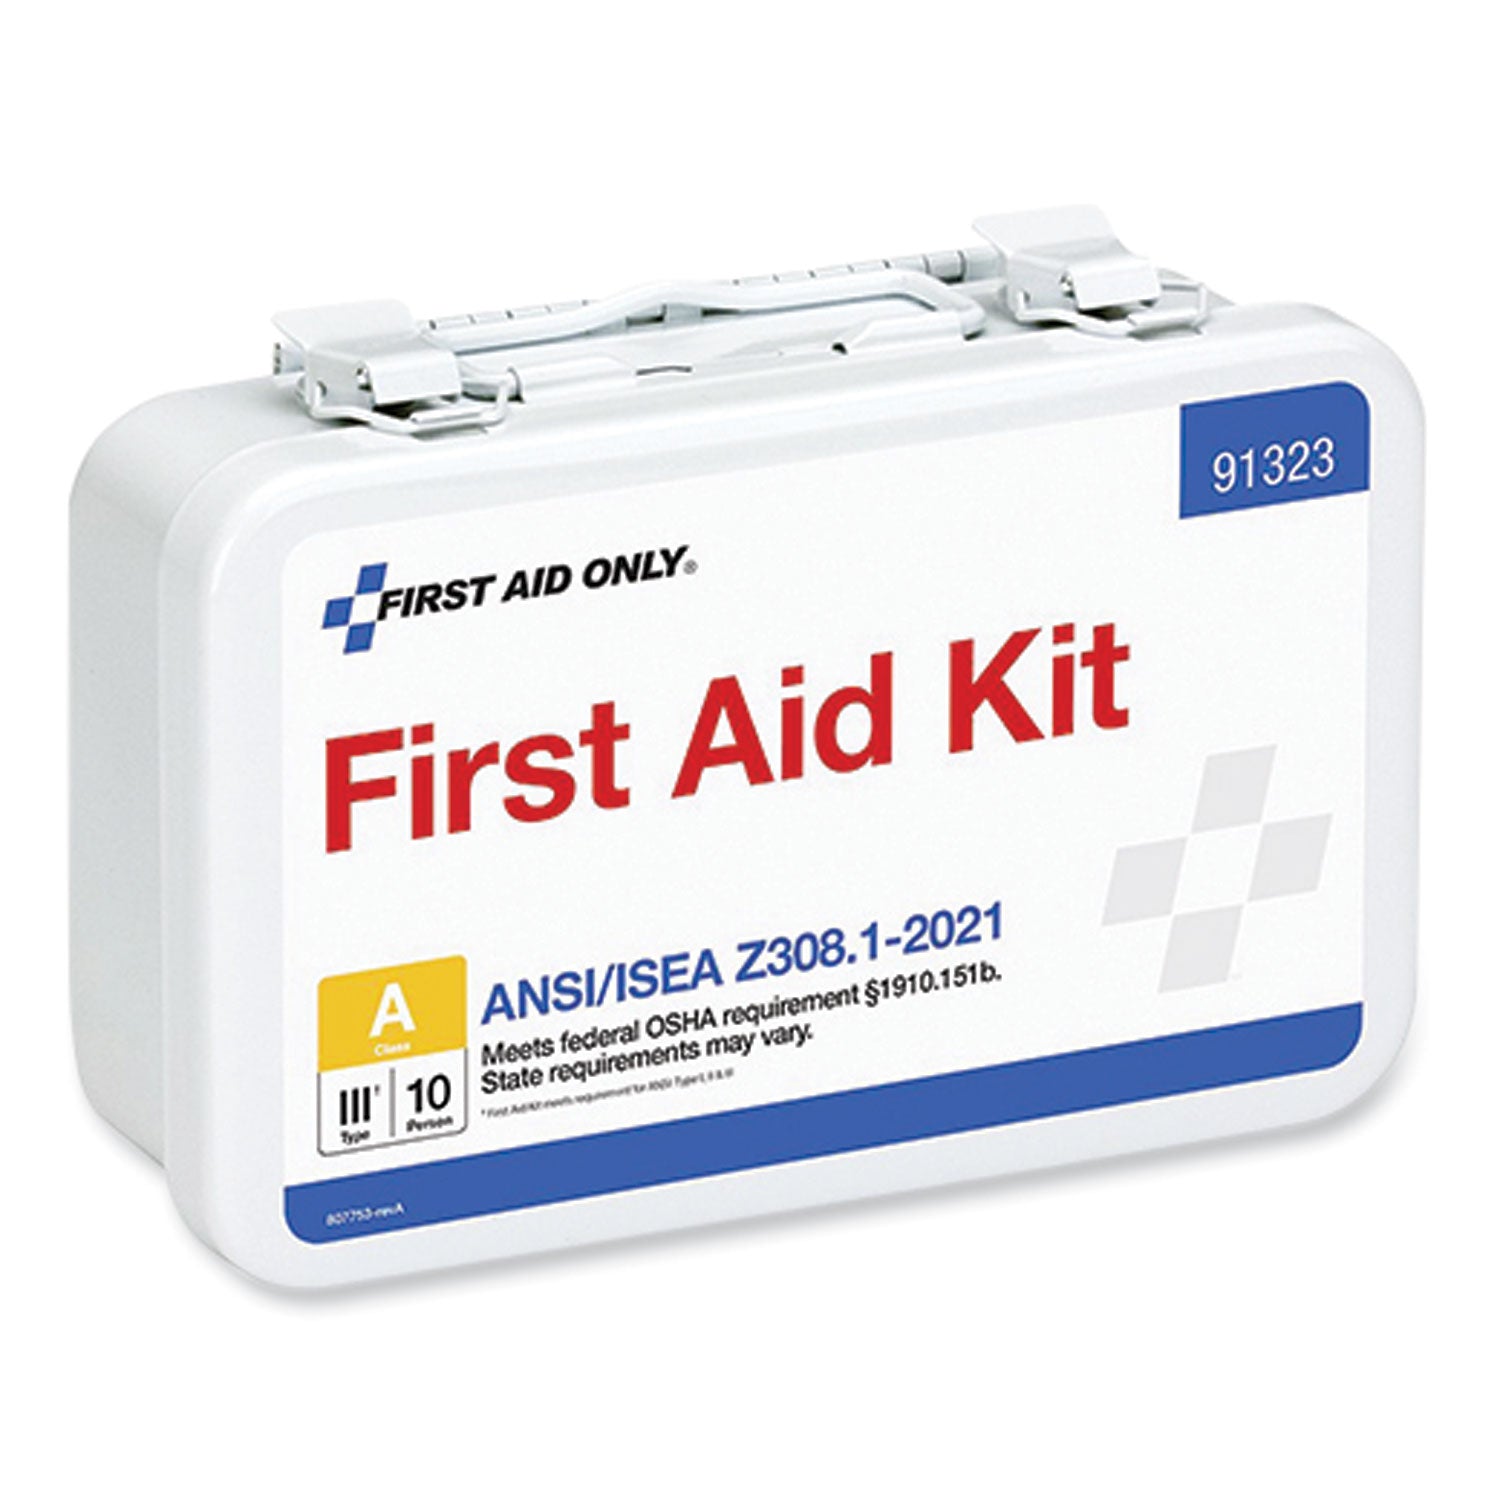 ansi-2021-first-aid-kit-for-10-people-76-pieces-metal-case_fao91323 - 2